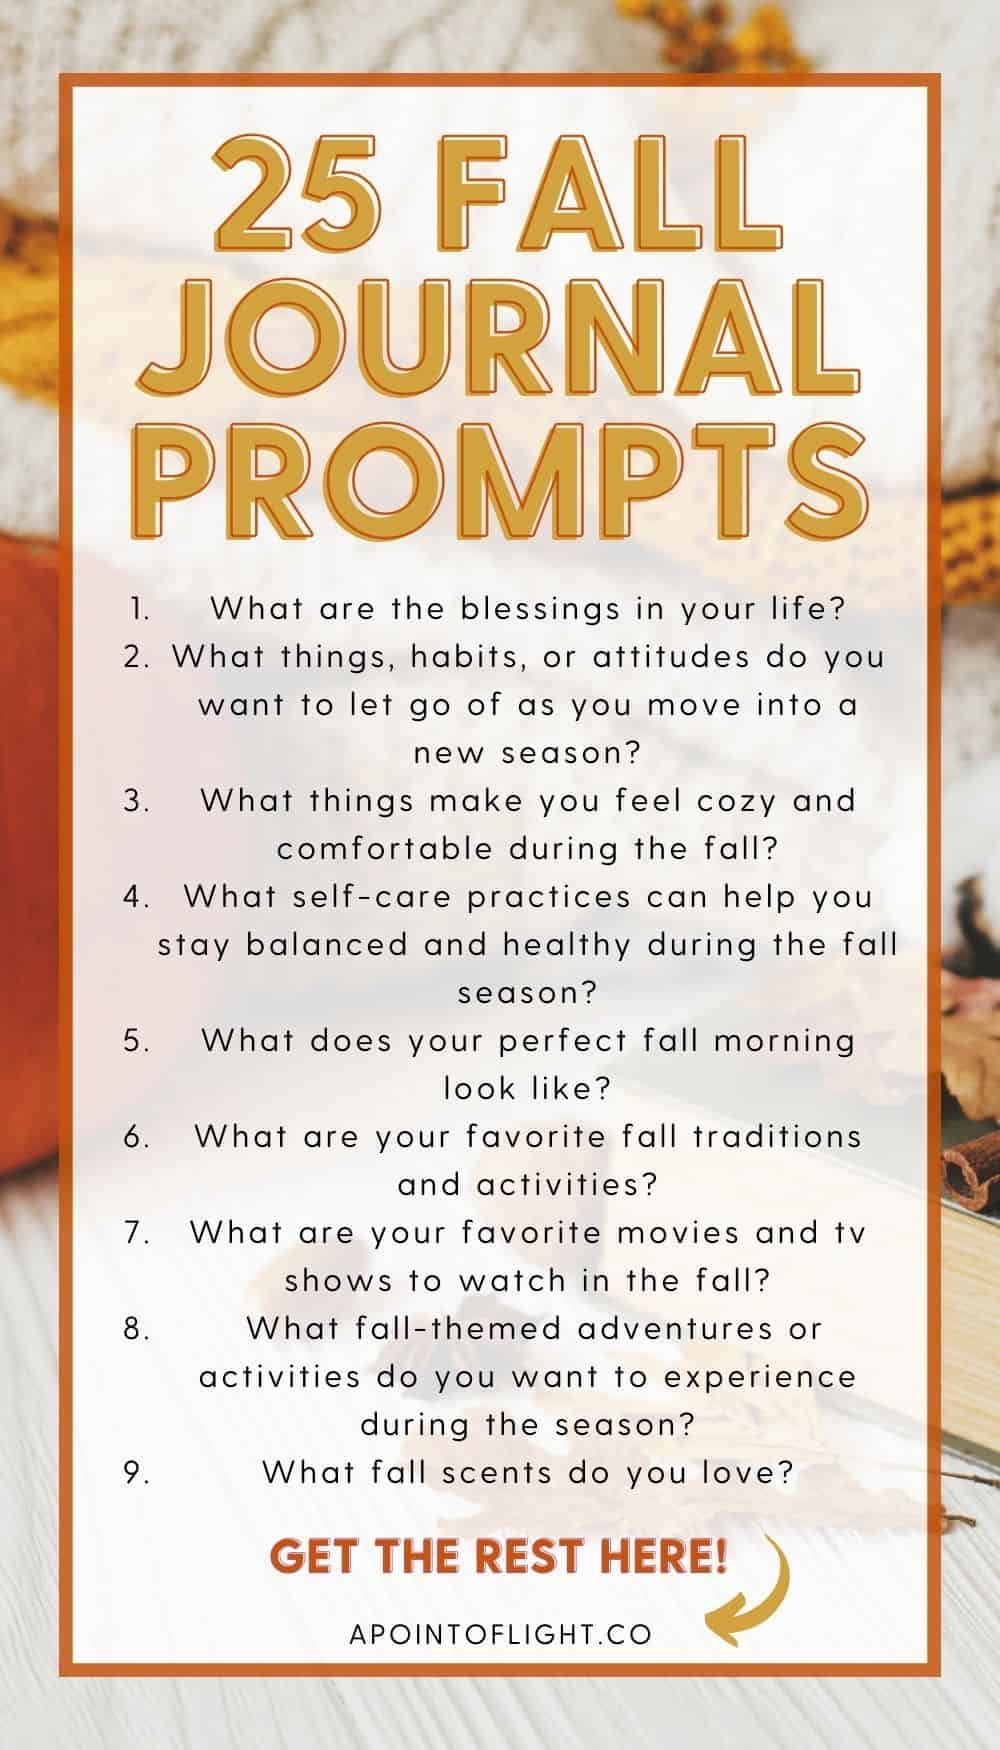 25 fall journal prompts